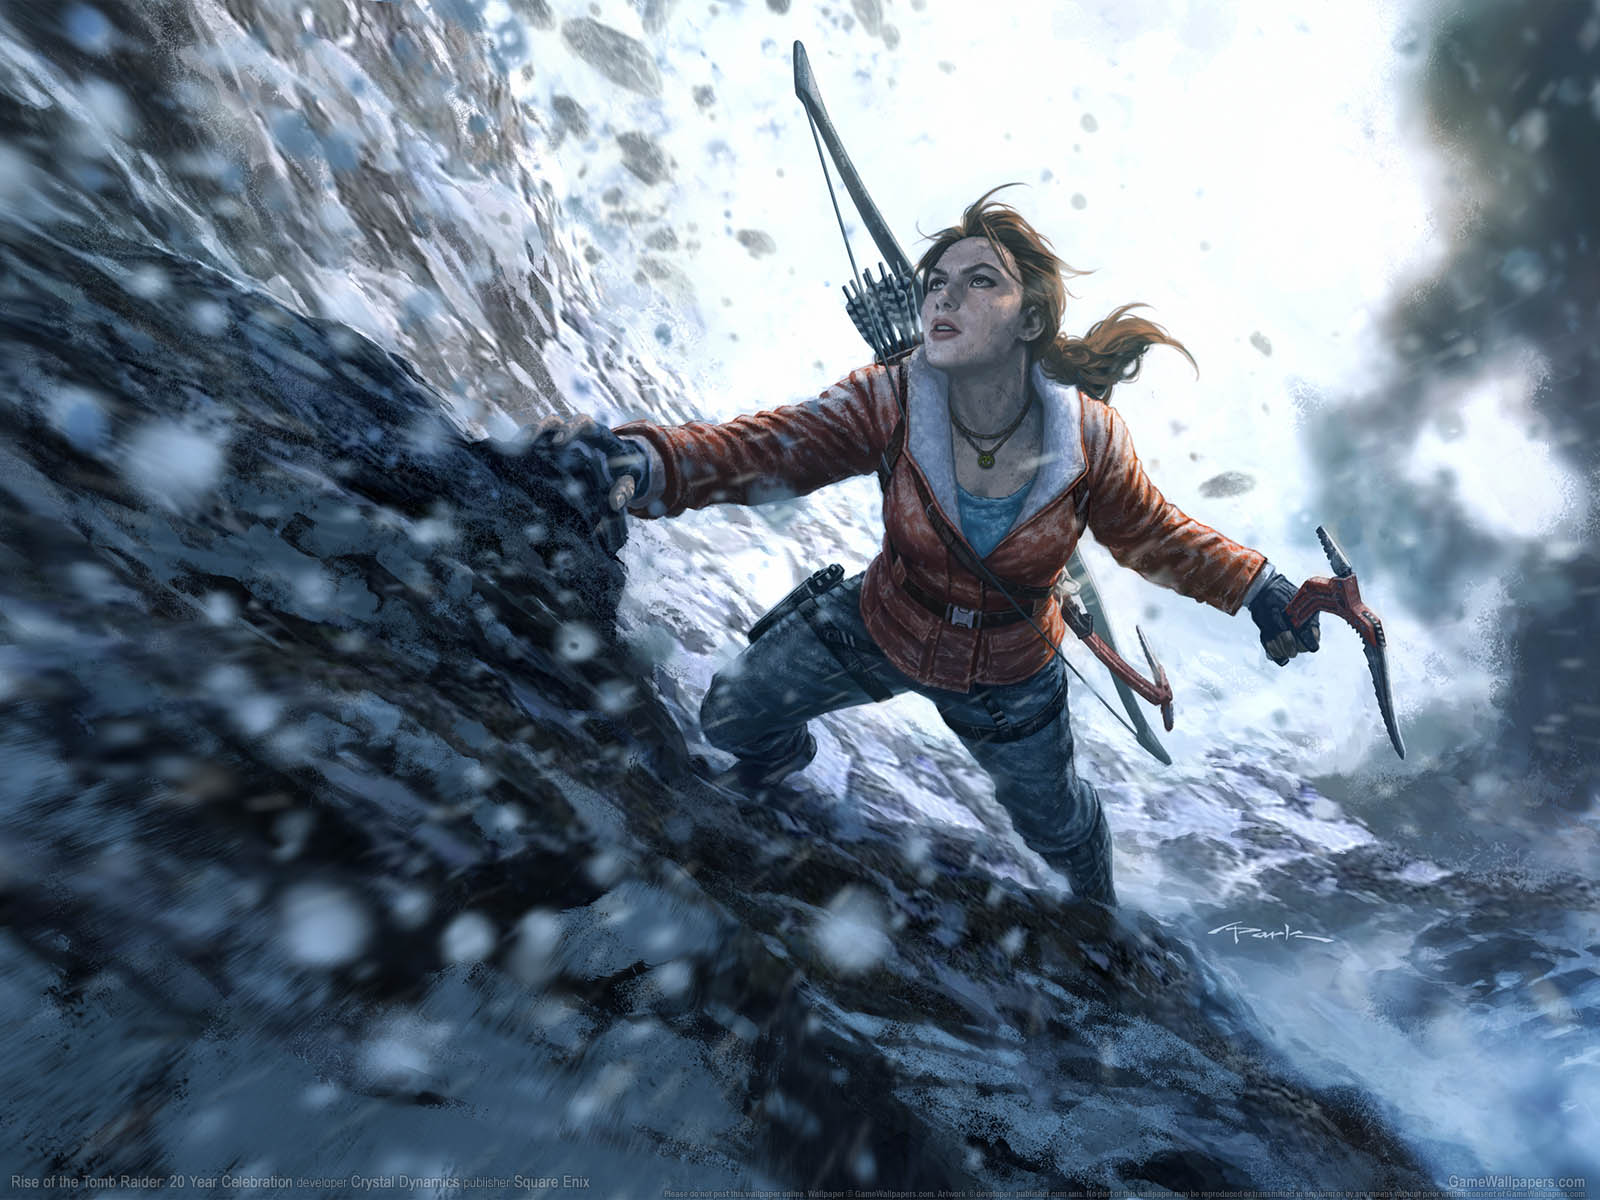 Rise of the Tomb Raider%2525253A 20 Year Celebration achtergrond 02 1600x1200